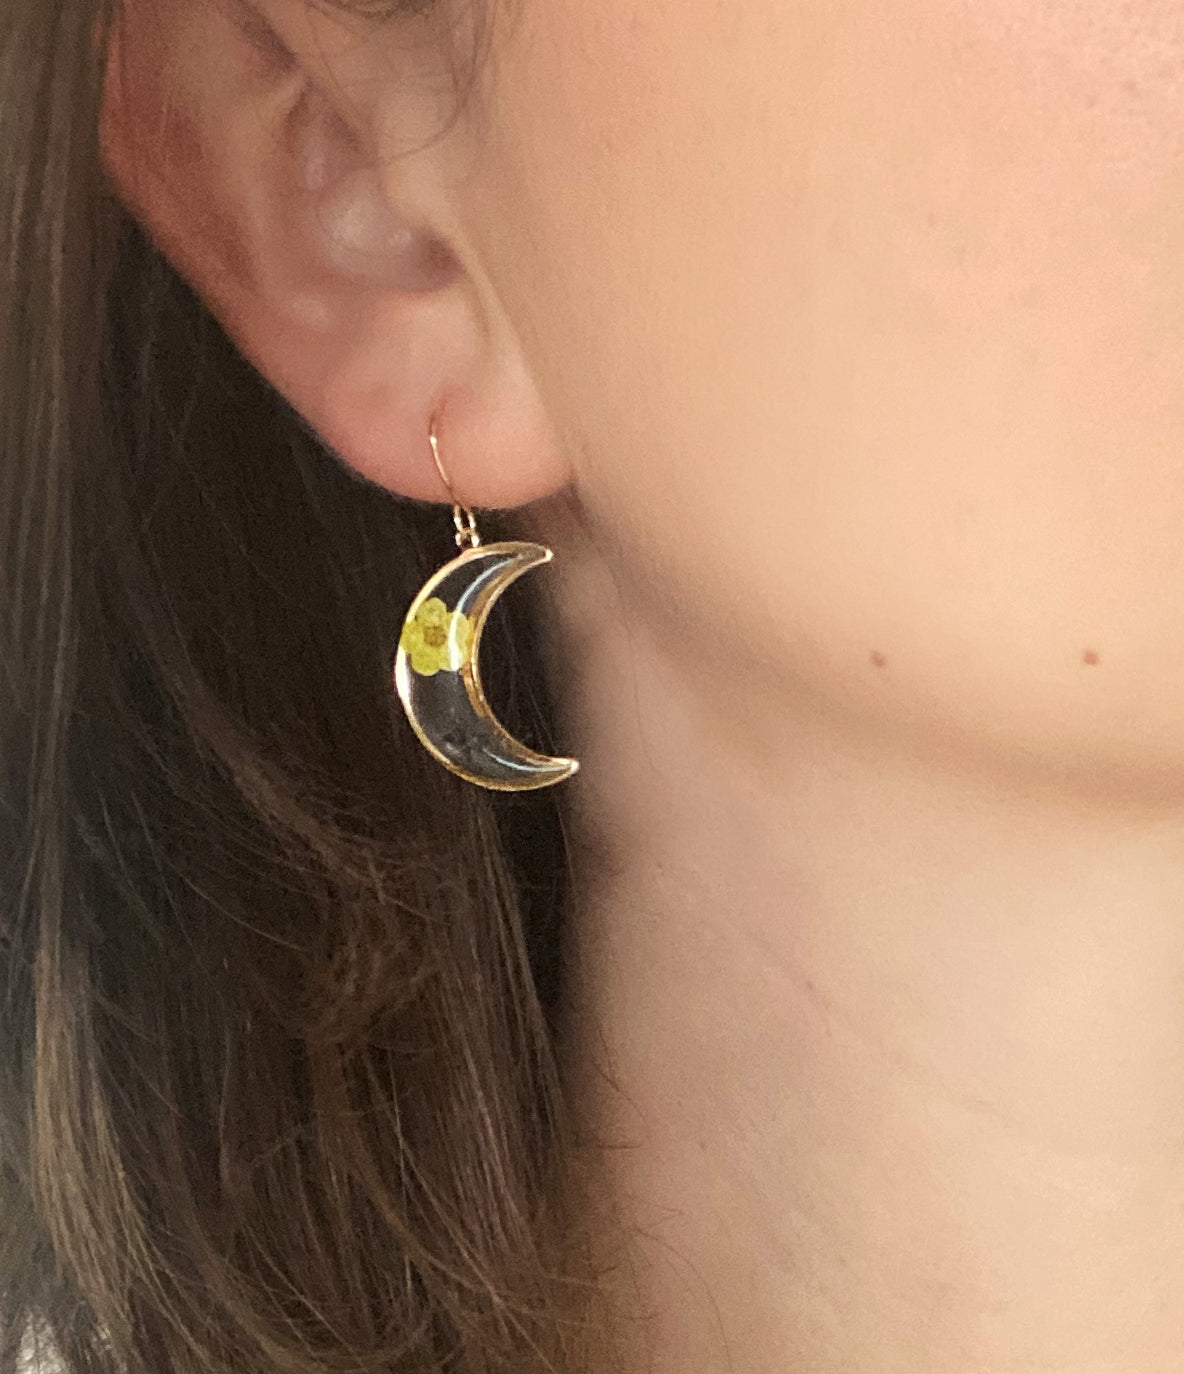 Crescent Moon Earrings. 14K Gold plated. Made with Real Pressed Flowers. Perfect for Halloween.